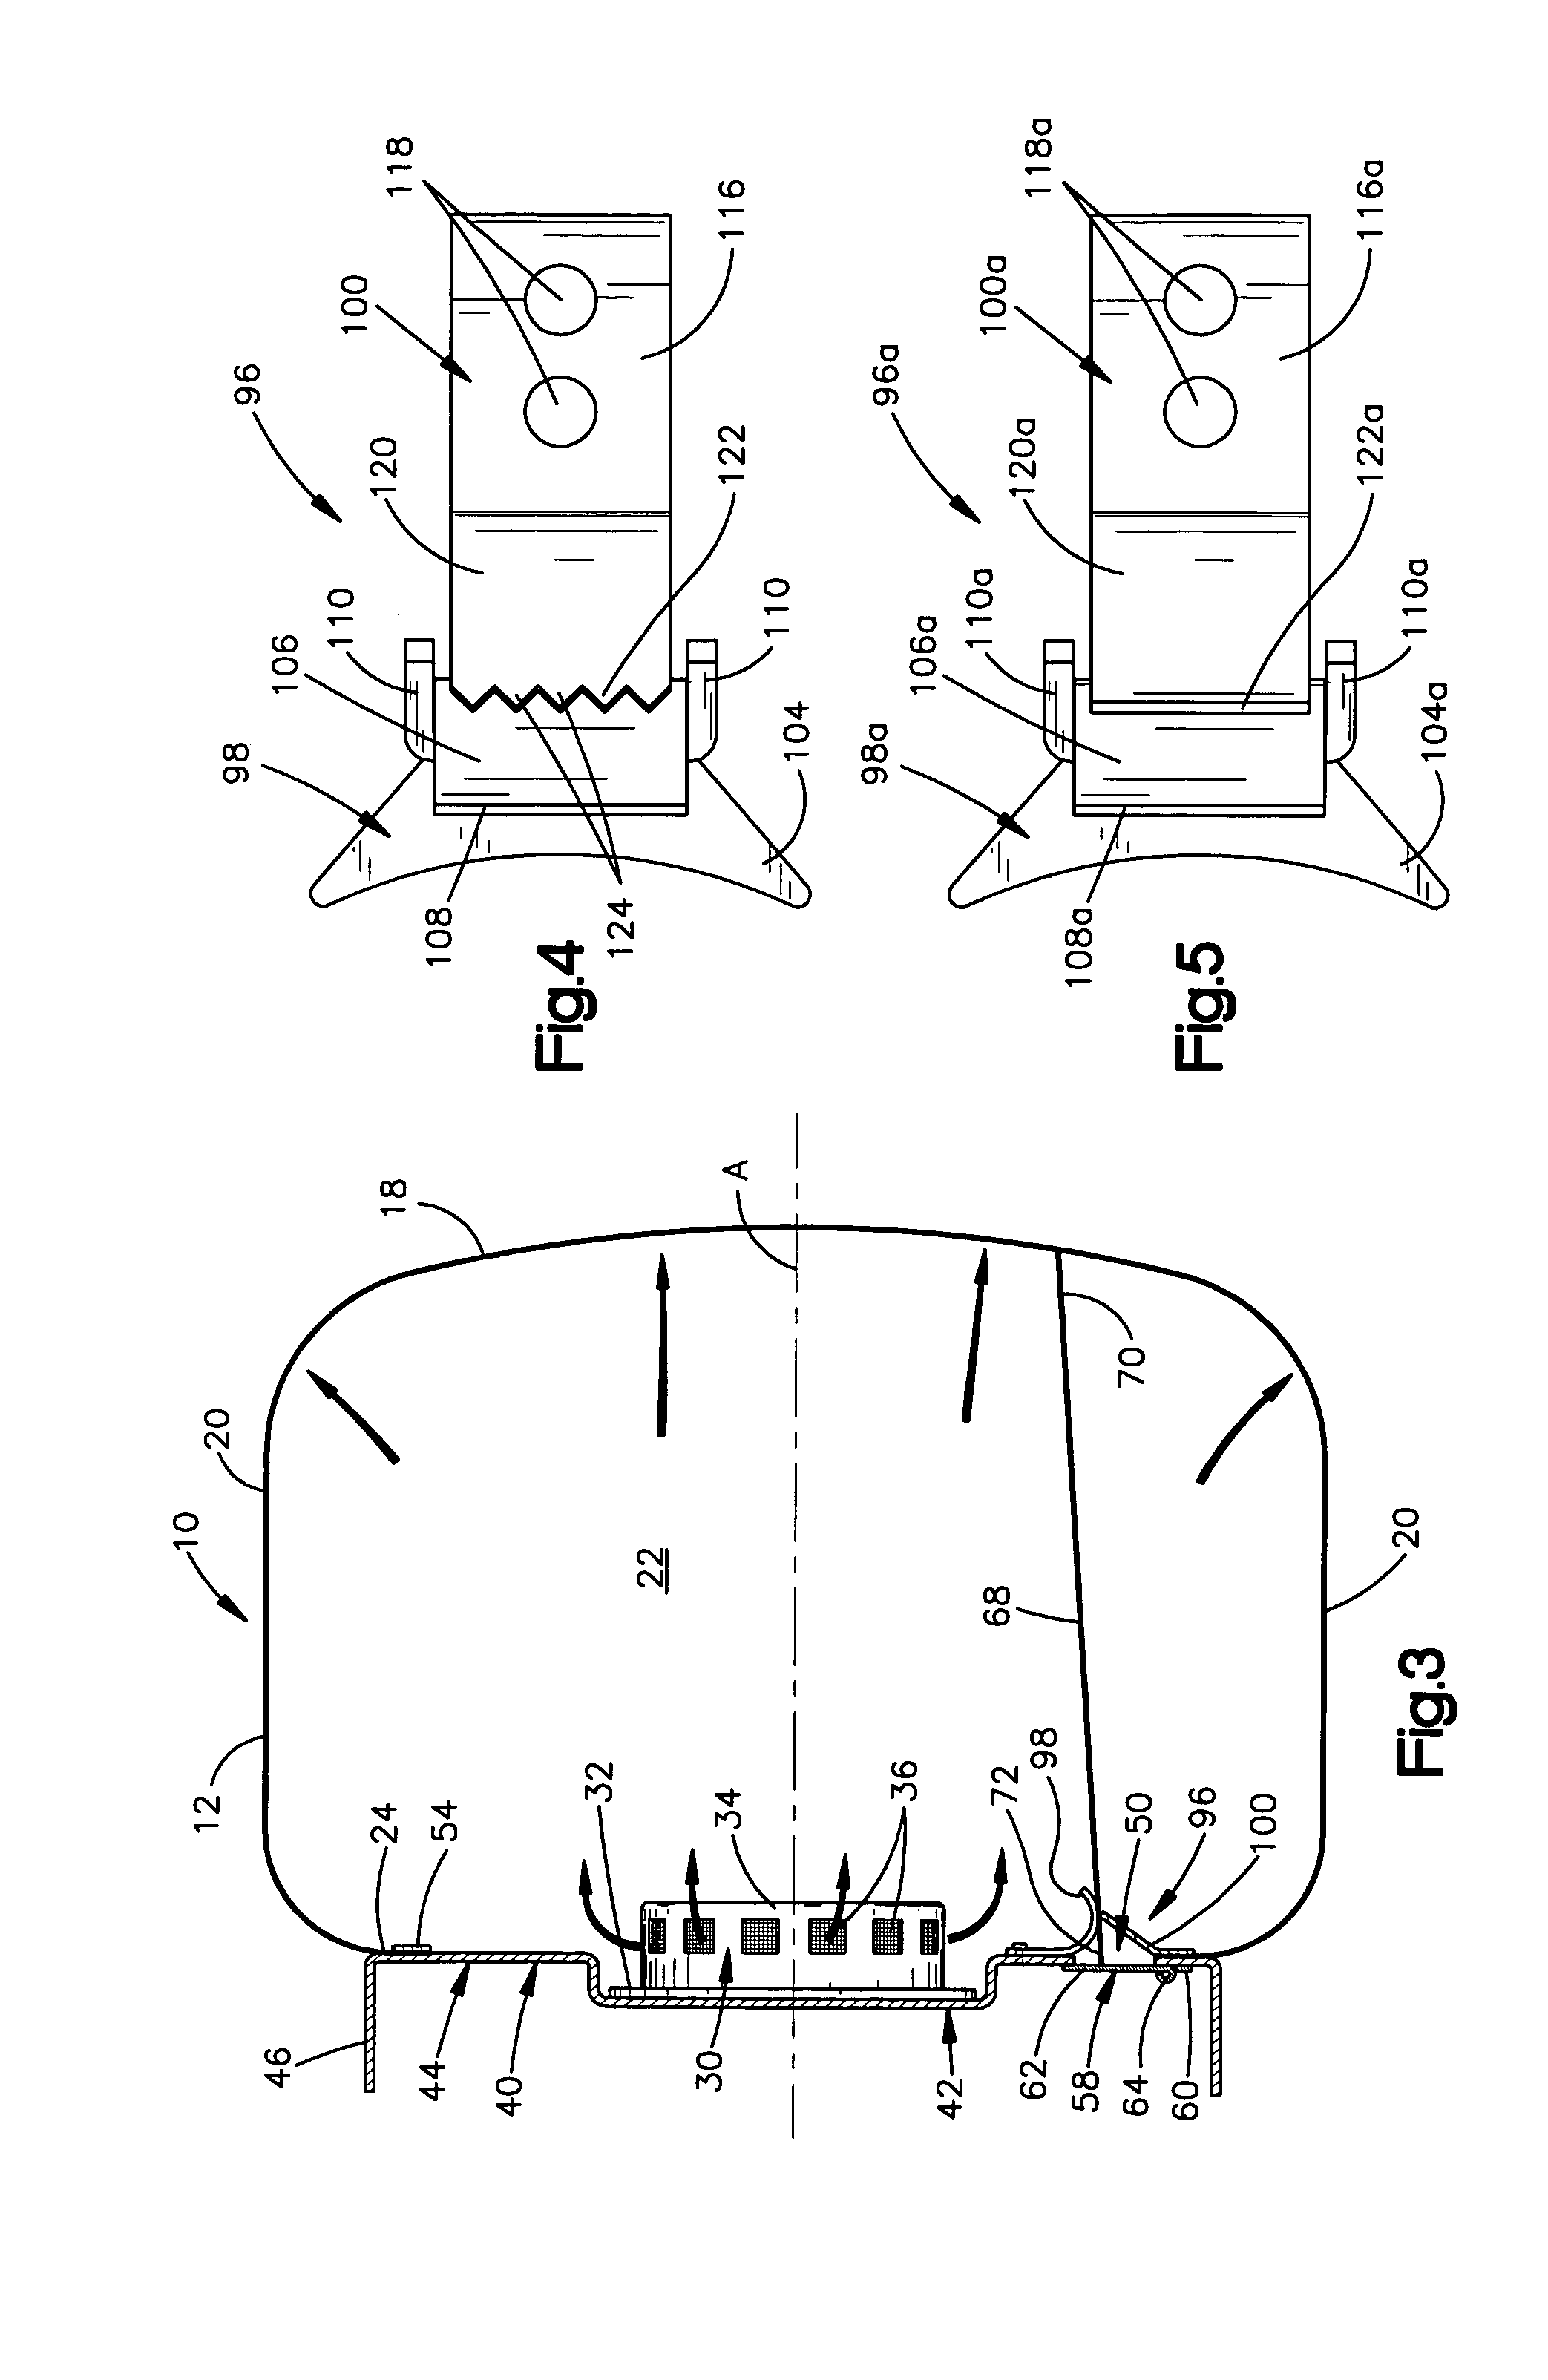 Air bag module with locking member for locking the position of a vent member